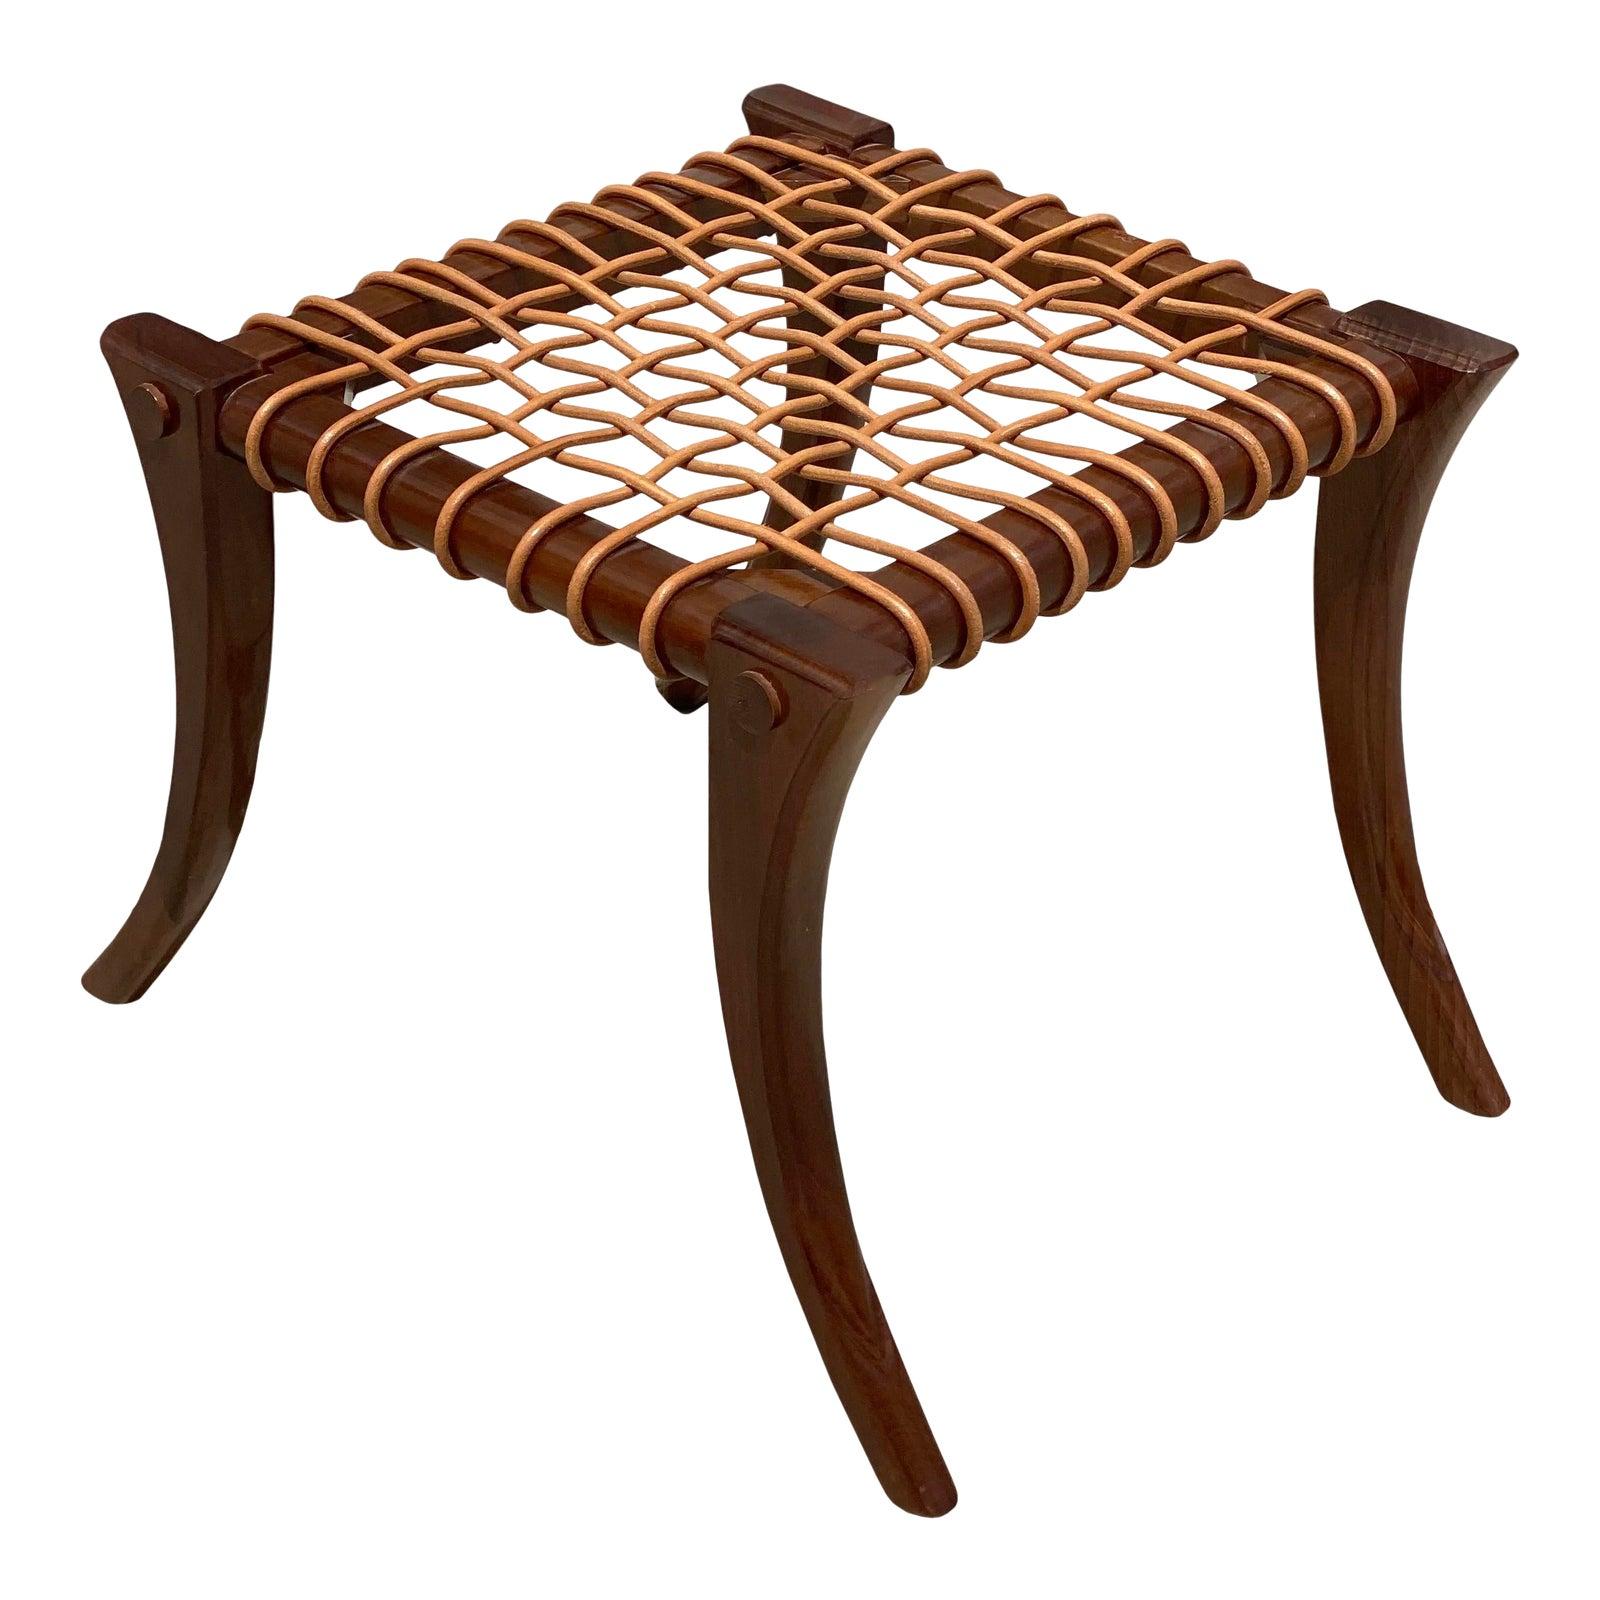 A beautiful, in-near perfect condition Kreiss Klismos woven wood ottoman or stool. Gorgeous and stunning piece. Unmarked.